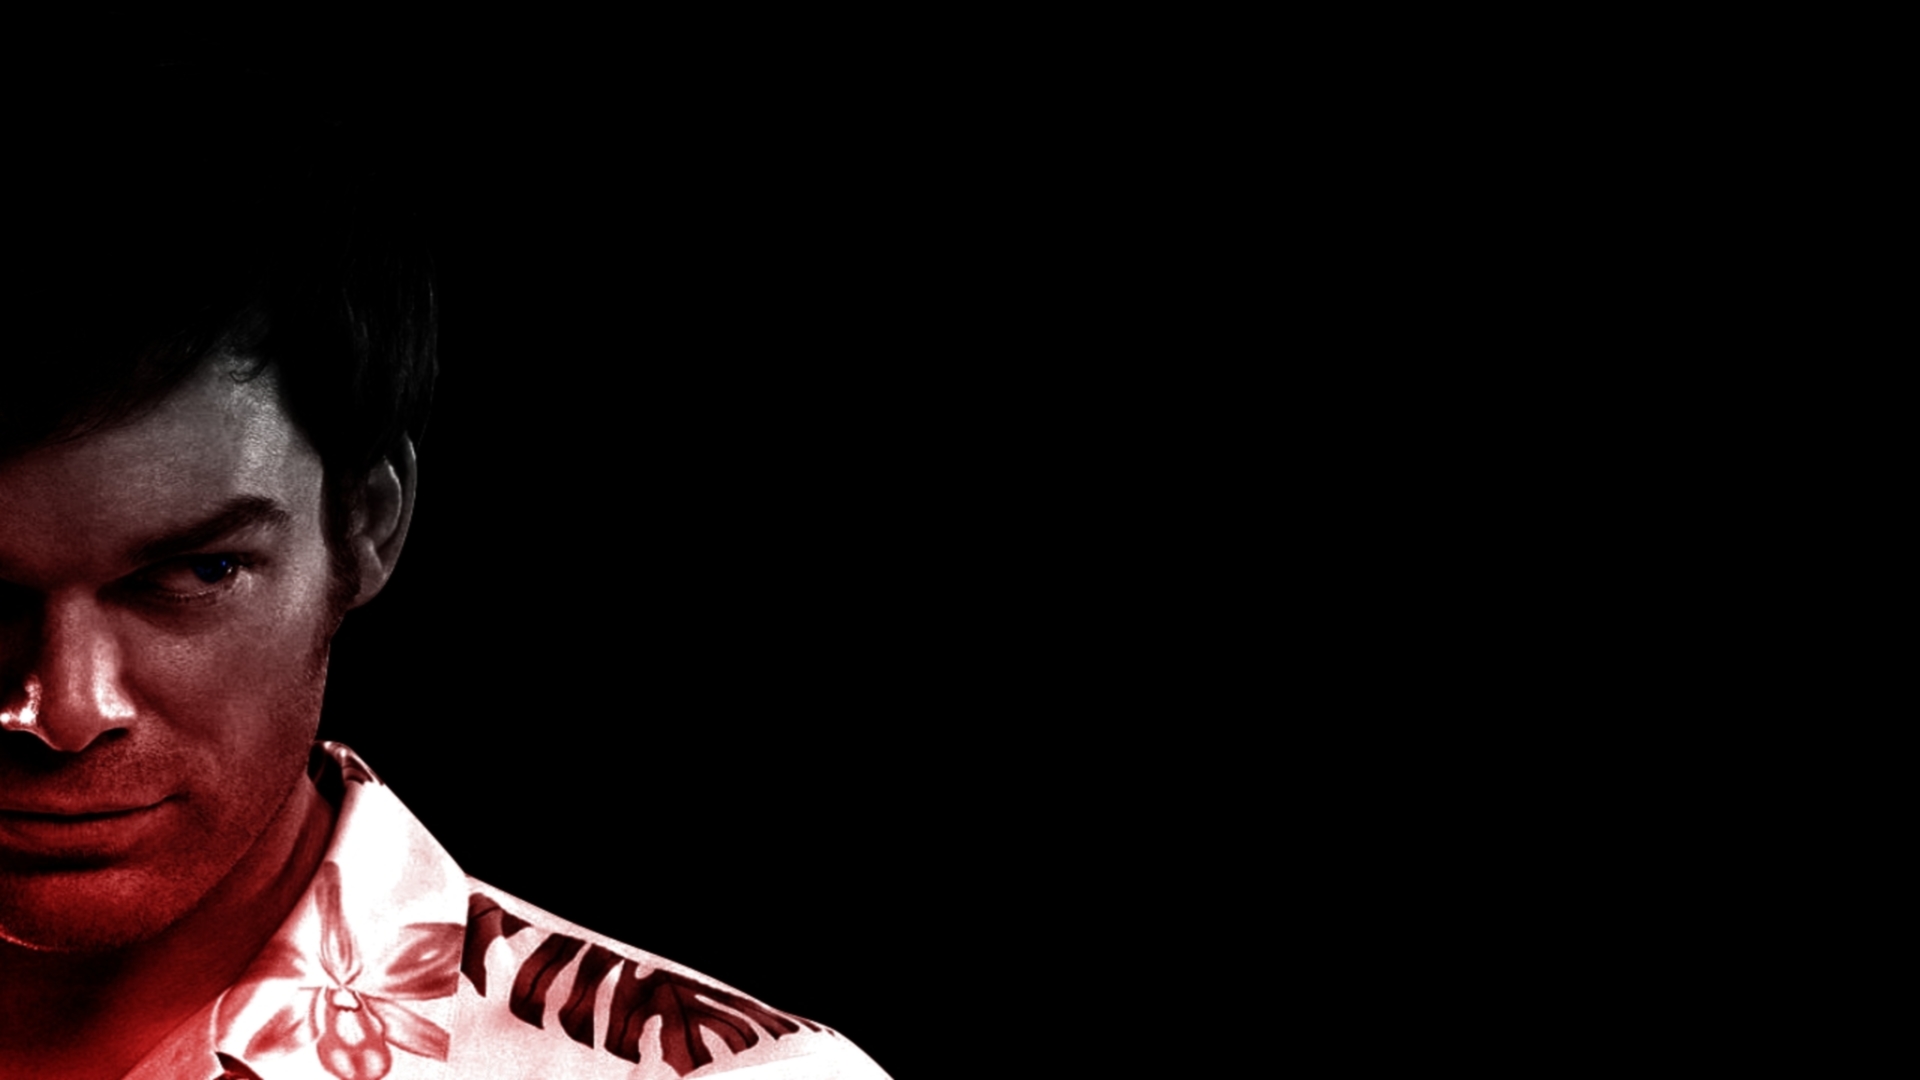 HD Wallpaper Of Dexter The Forensic Geek I Have A Pc